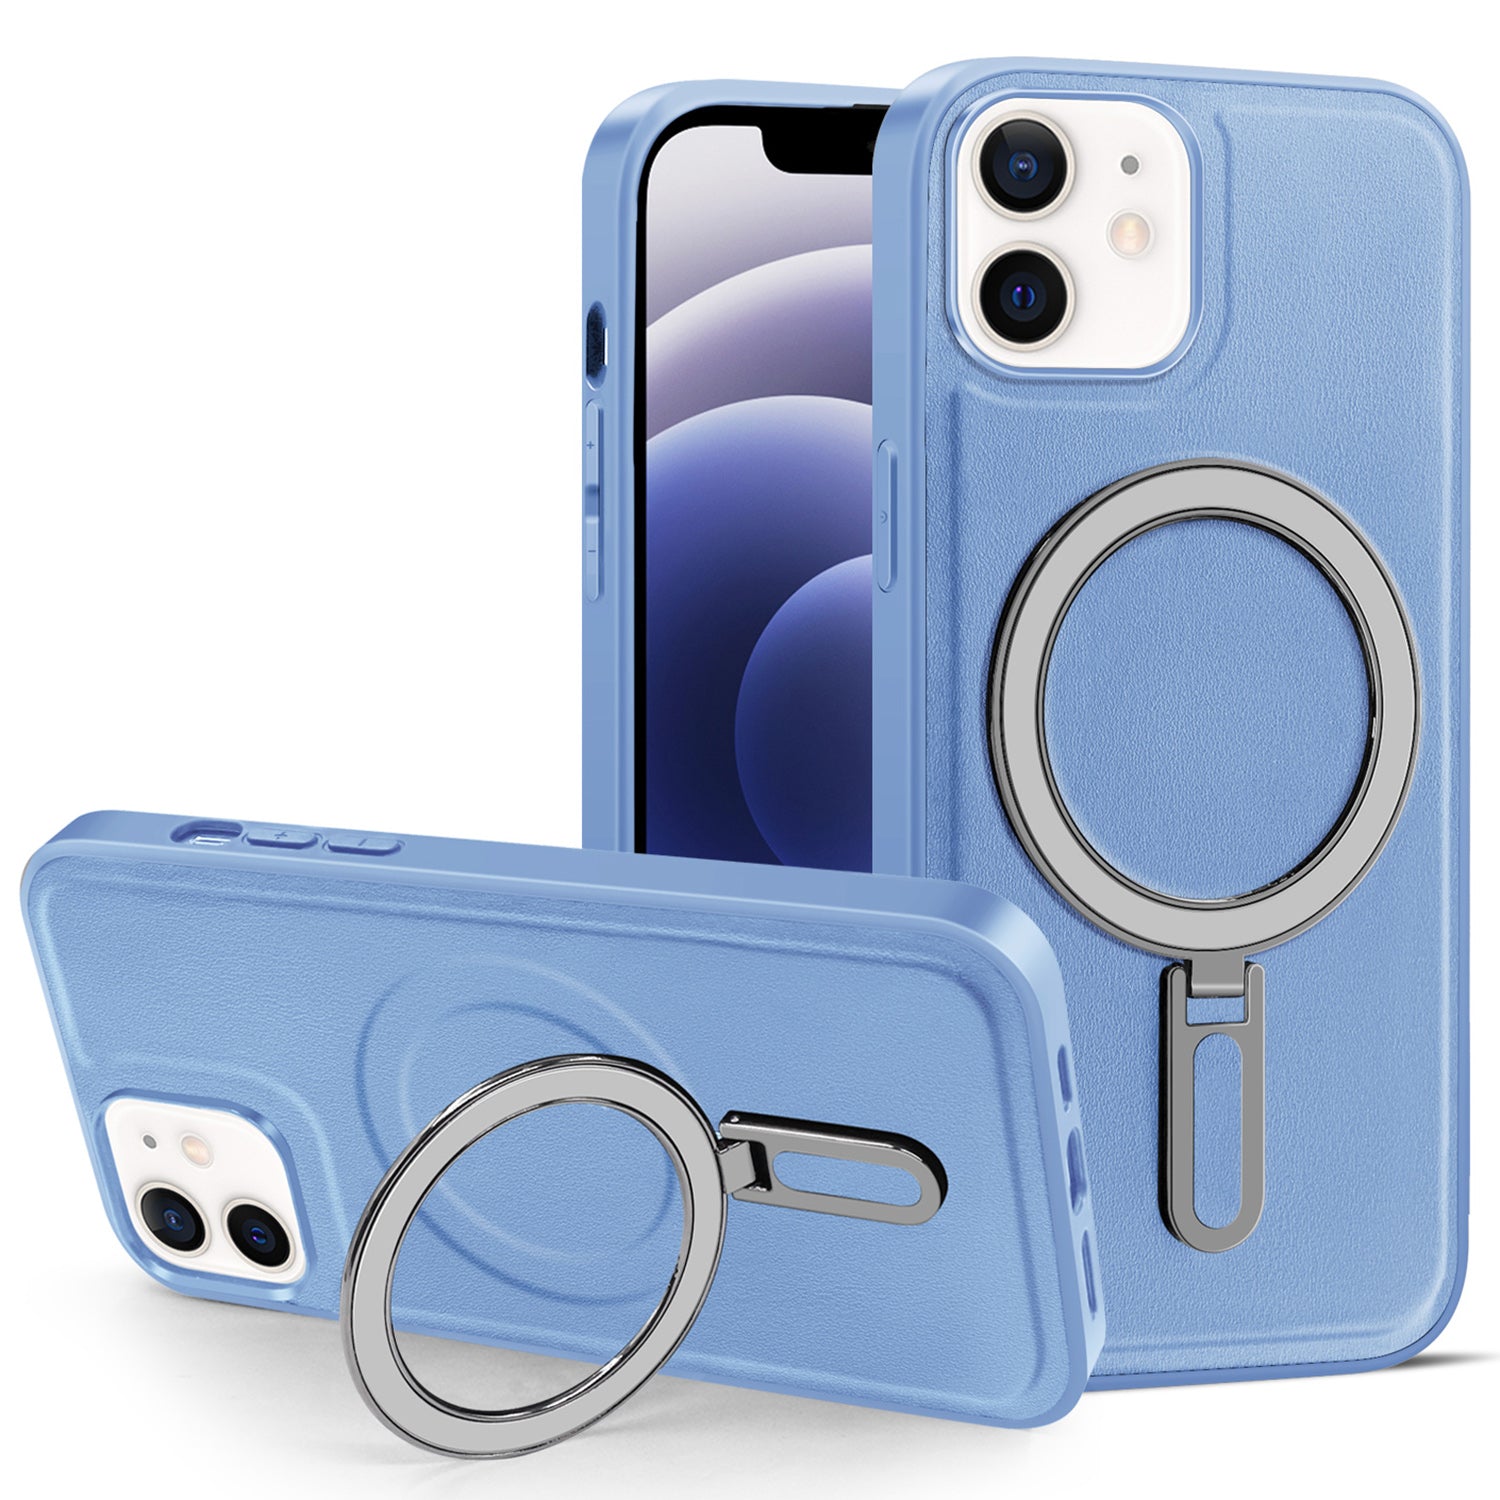 Uniqkart for iPhone 12 / 12 Pro 6.1 inch Phone Case Kickstand Design PU Leather Coated PC+TPU Magnetic Cover - Baby Blue